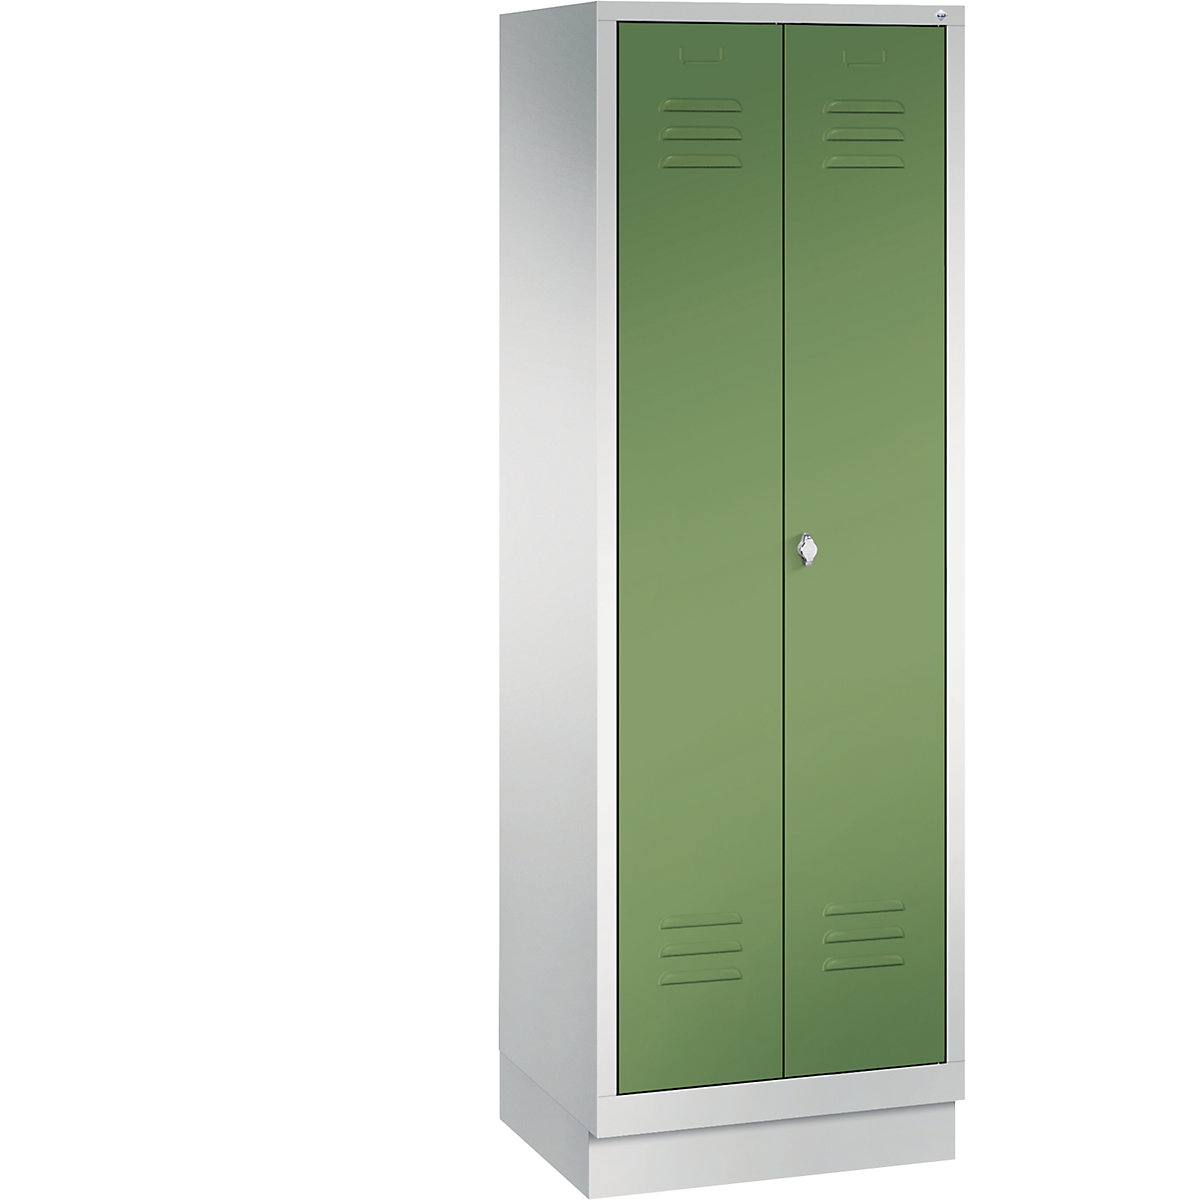 CLASSIC storage cupboard with plinth, doors close in the middle – C+P, 2 compartments, compartment width 300 mm, light grey / reseda green-10